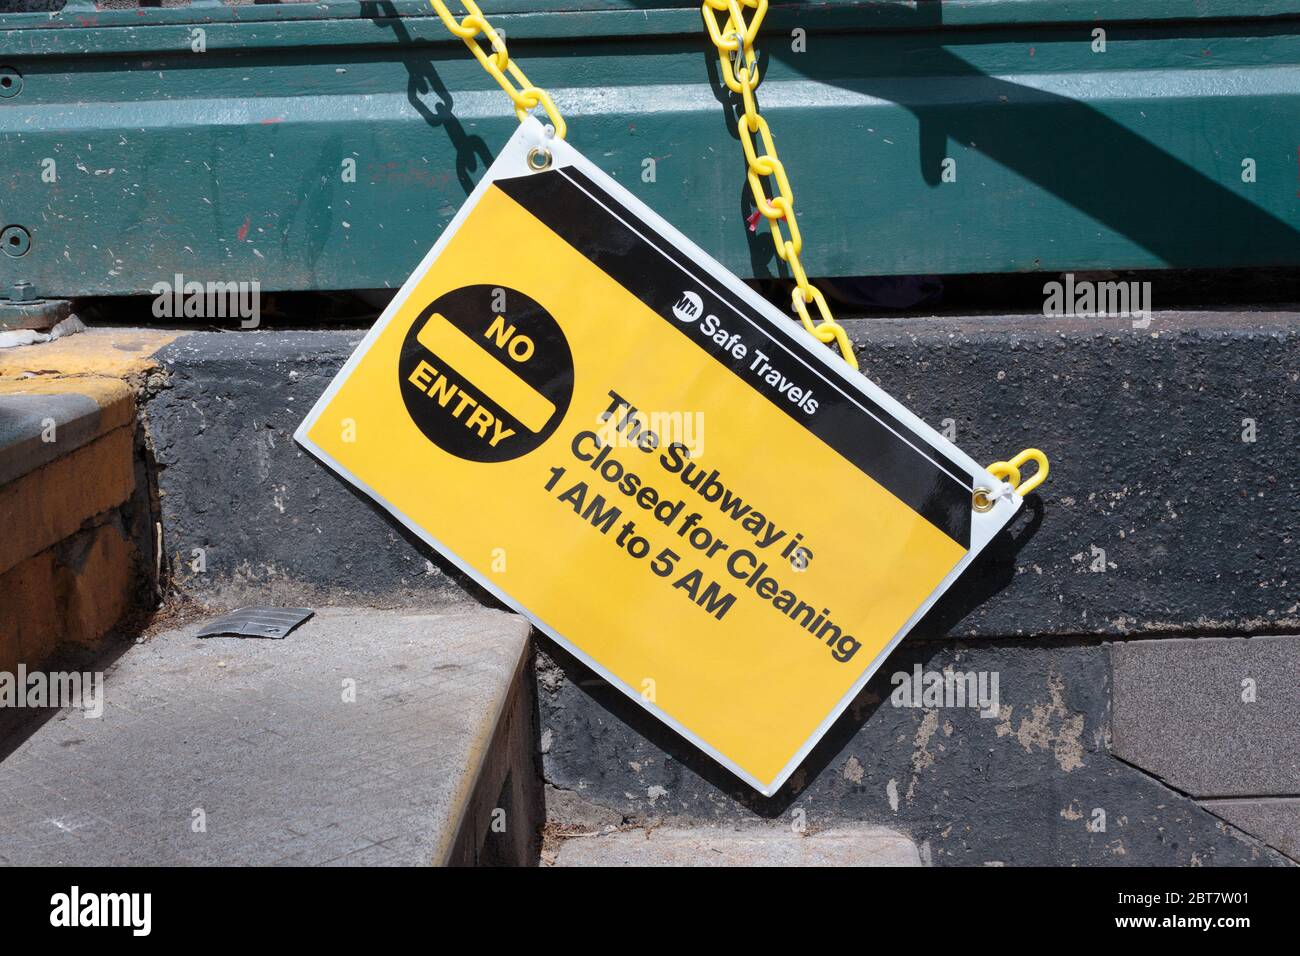 a fallen sign on the stairs of a subway stop says it is closed for cleaning between 1 and 5 am during the coronavirus or covid-19 pandemic Stock Photo